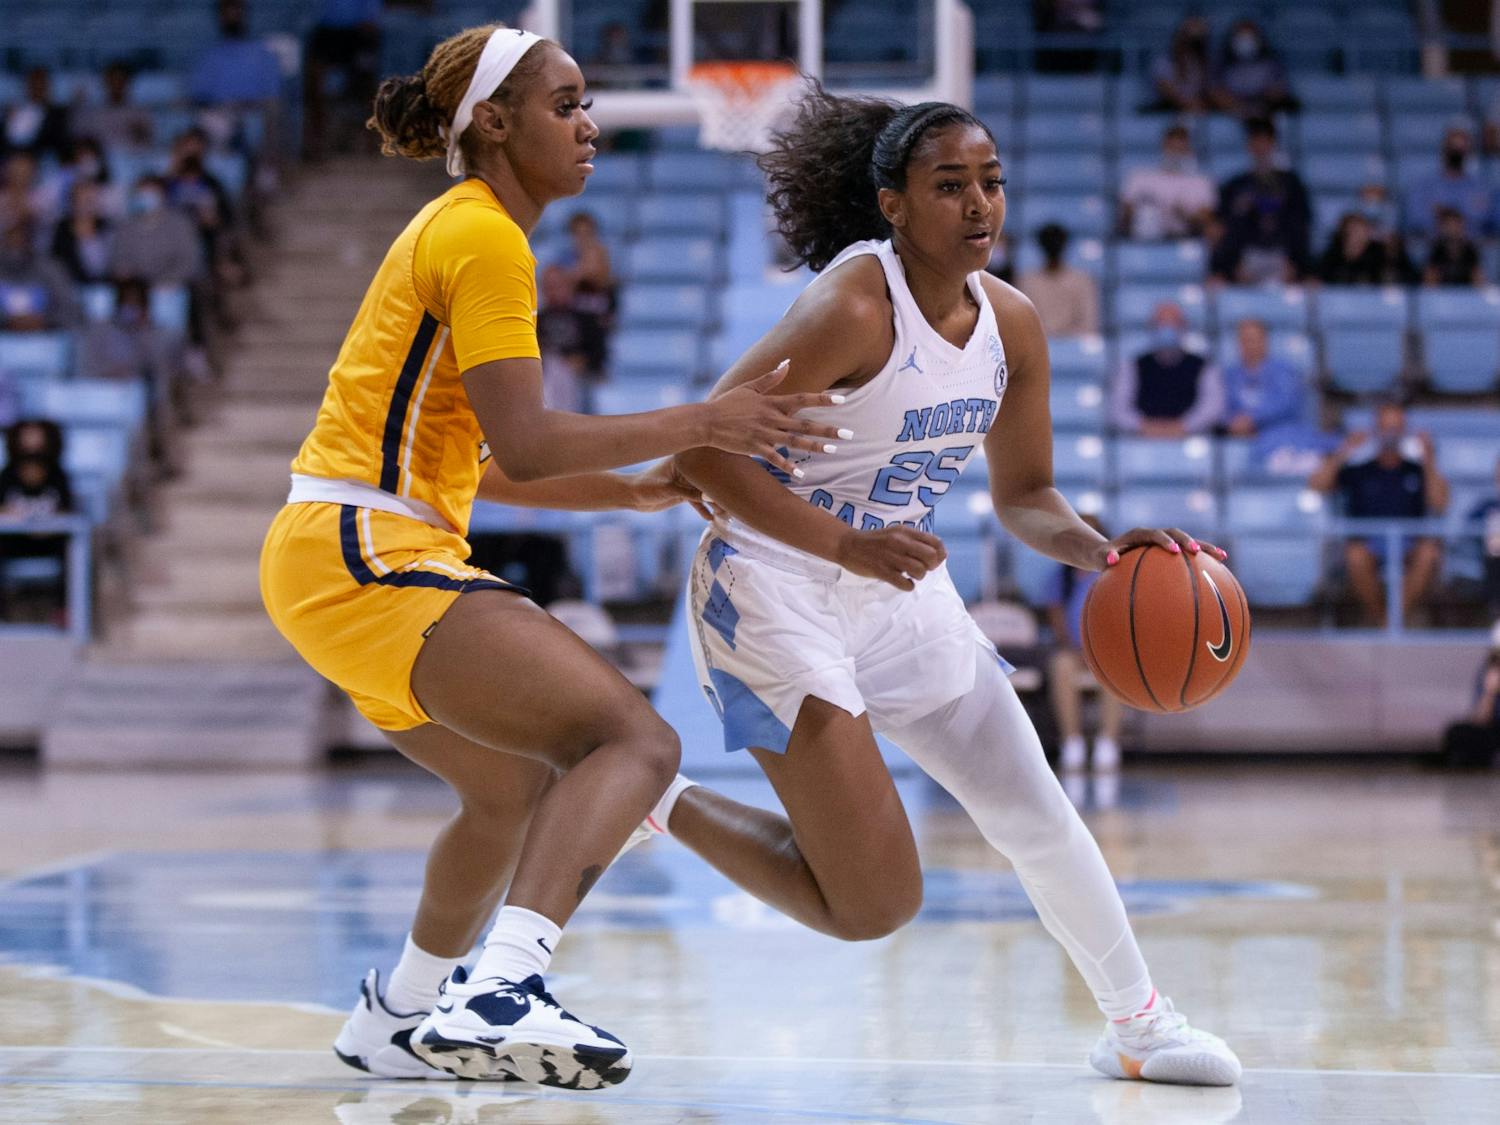 Sophomore guard Deja Kelly (25) runs with the ball at the game against NC A&T on Nov. 9 2021 at Carmichael Arena. UNC won 92-47.